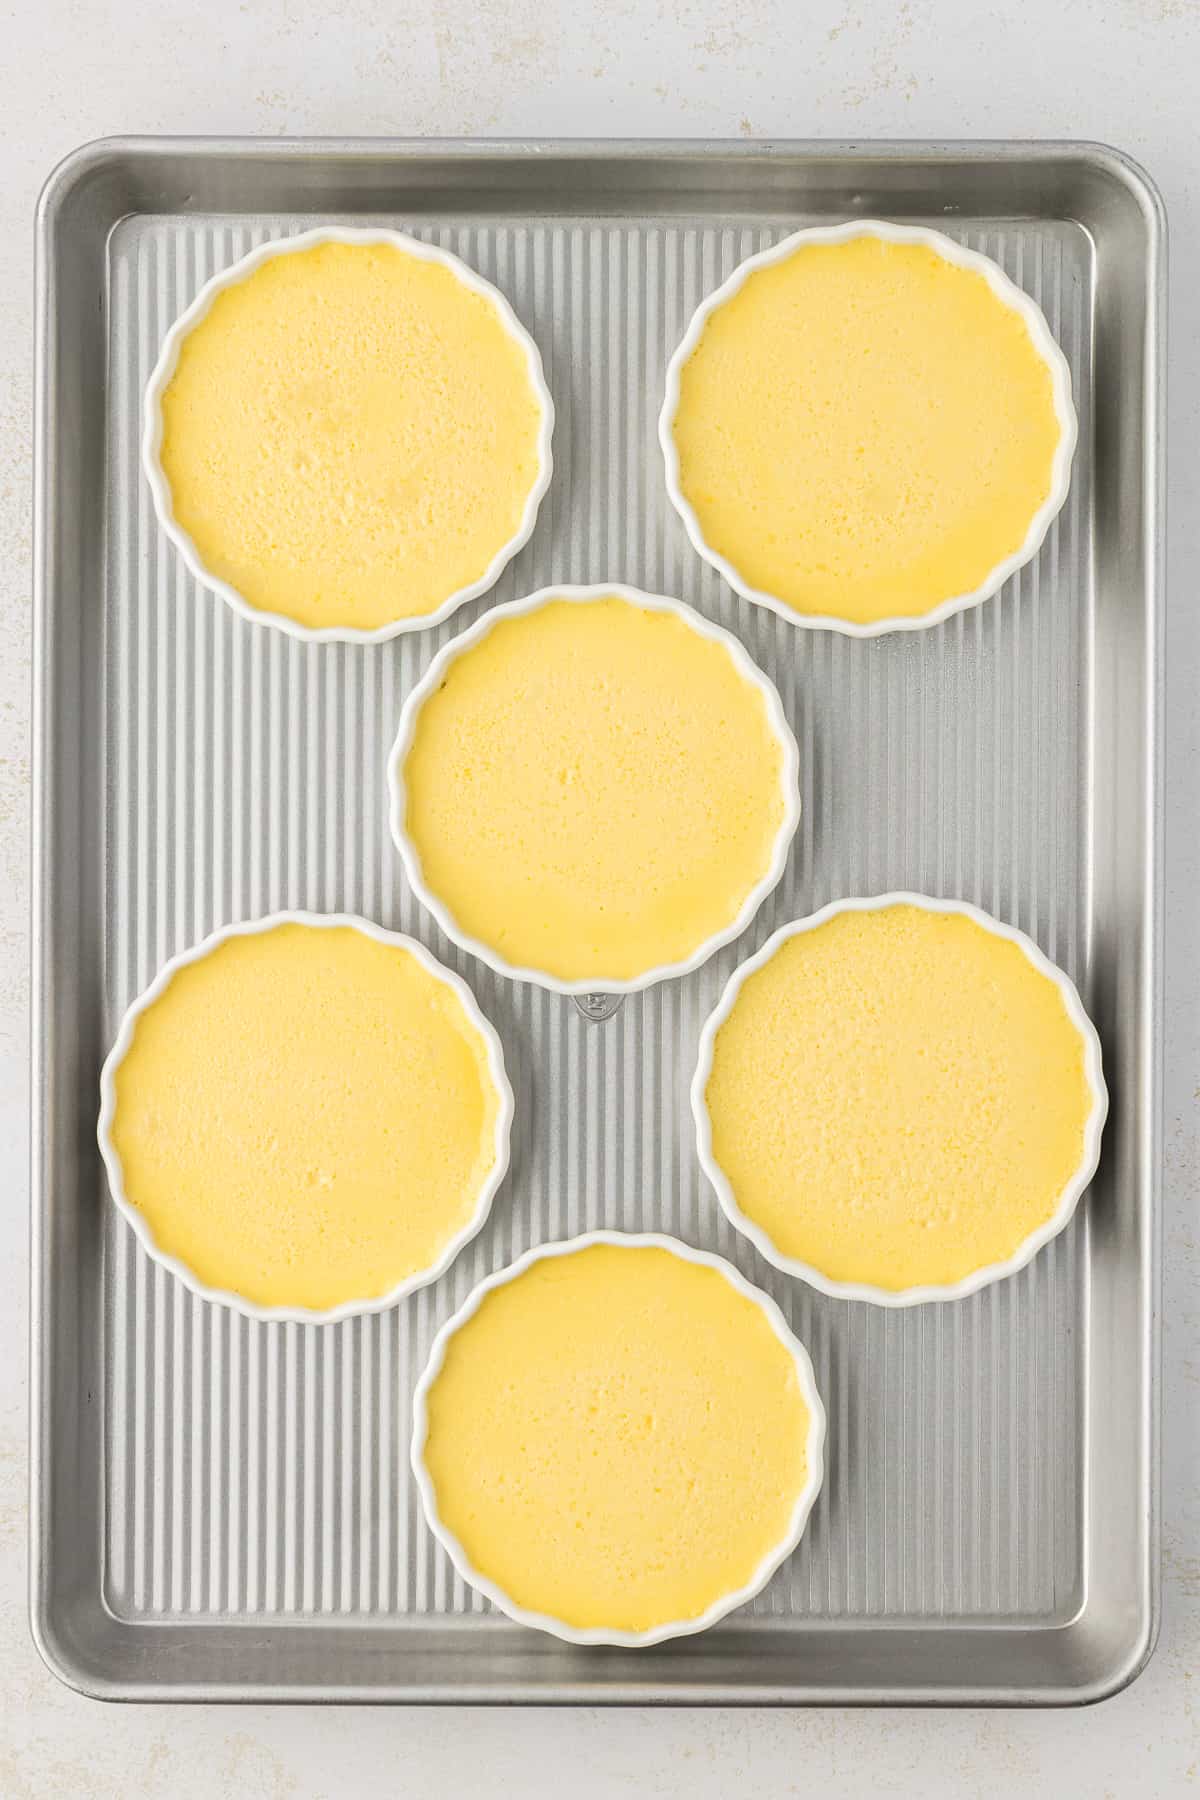 over head view of a baking sheet with 6 white ramekins of freshly baked creme brulee on it